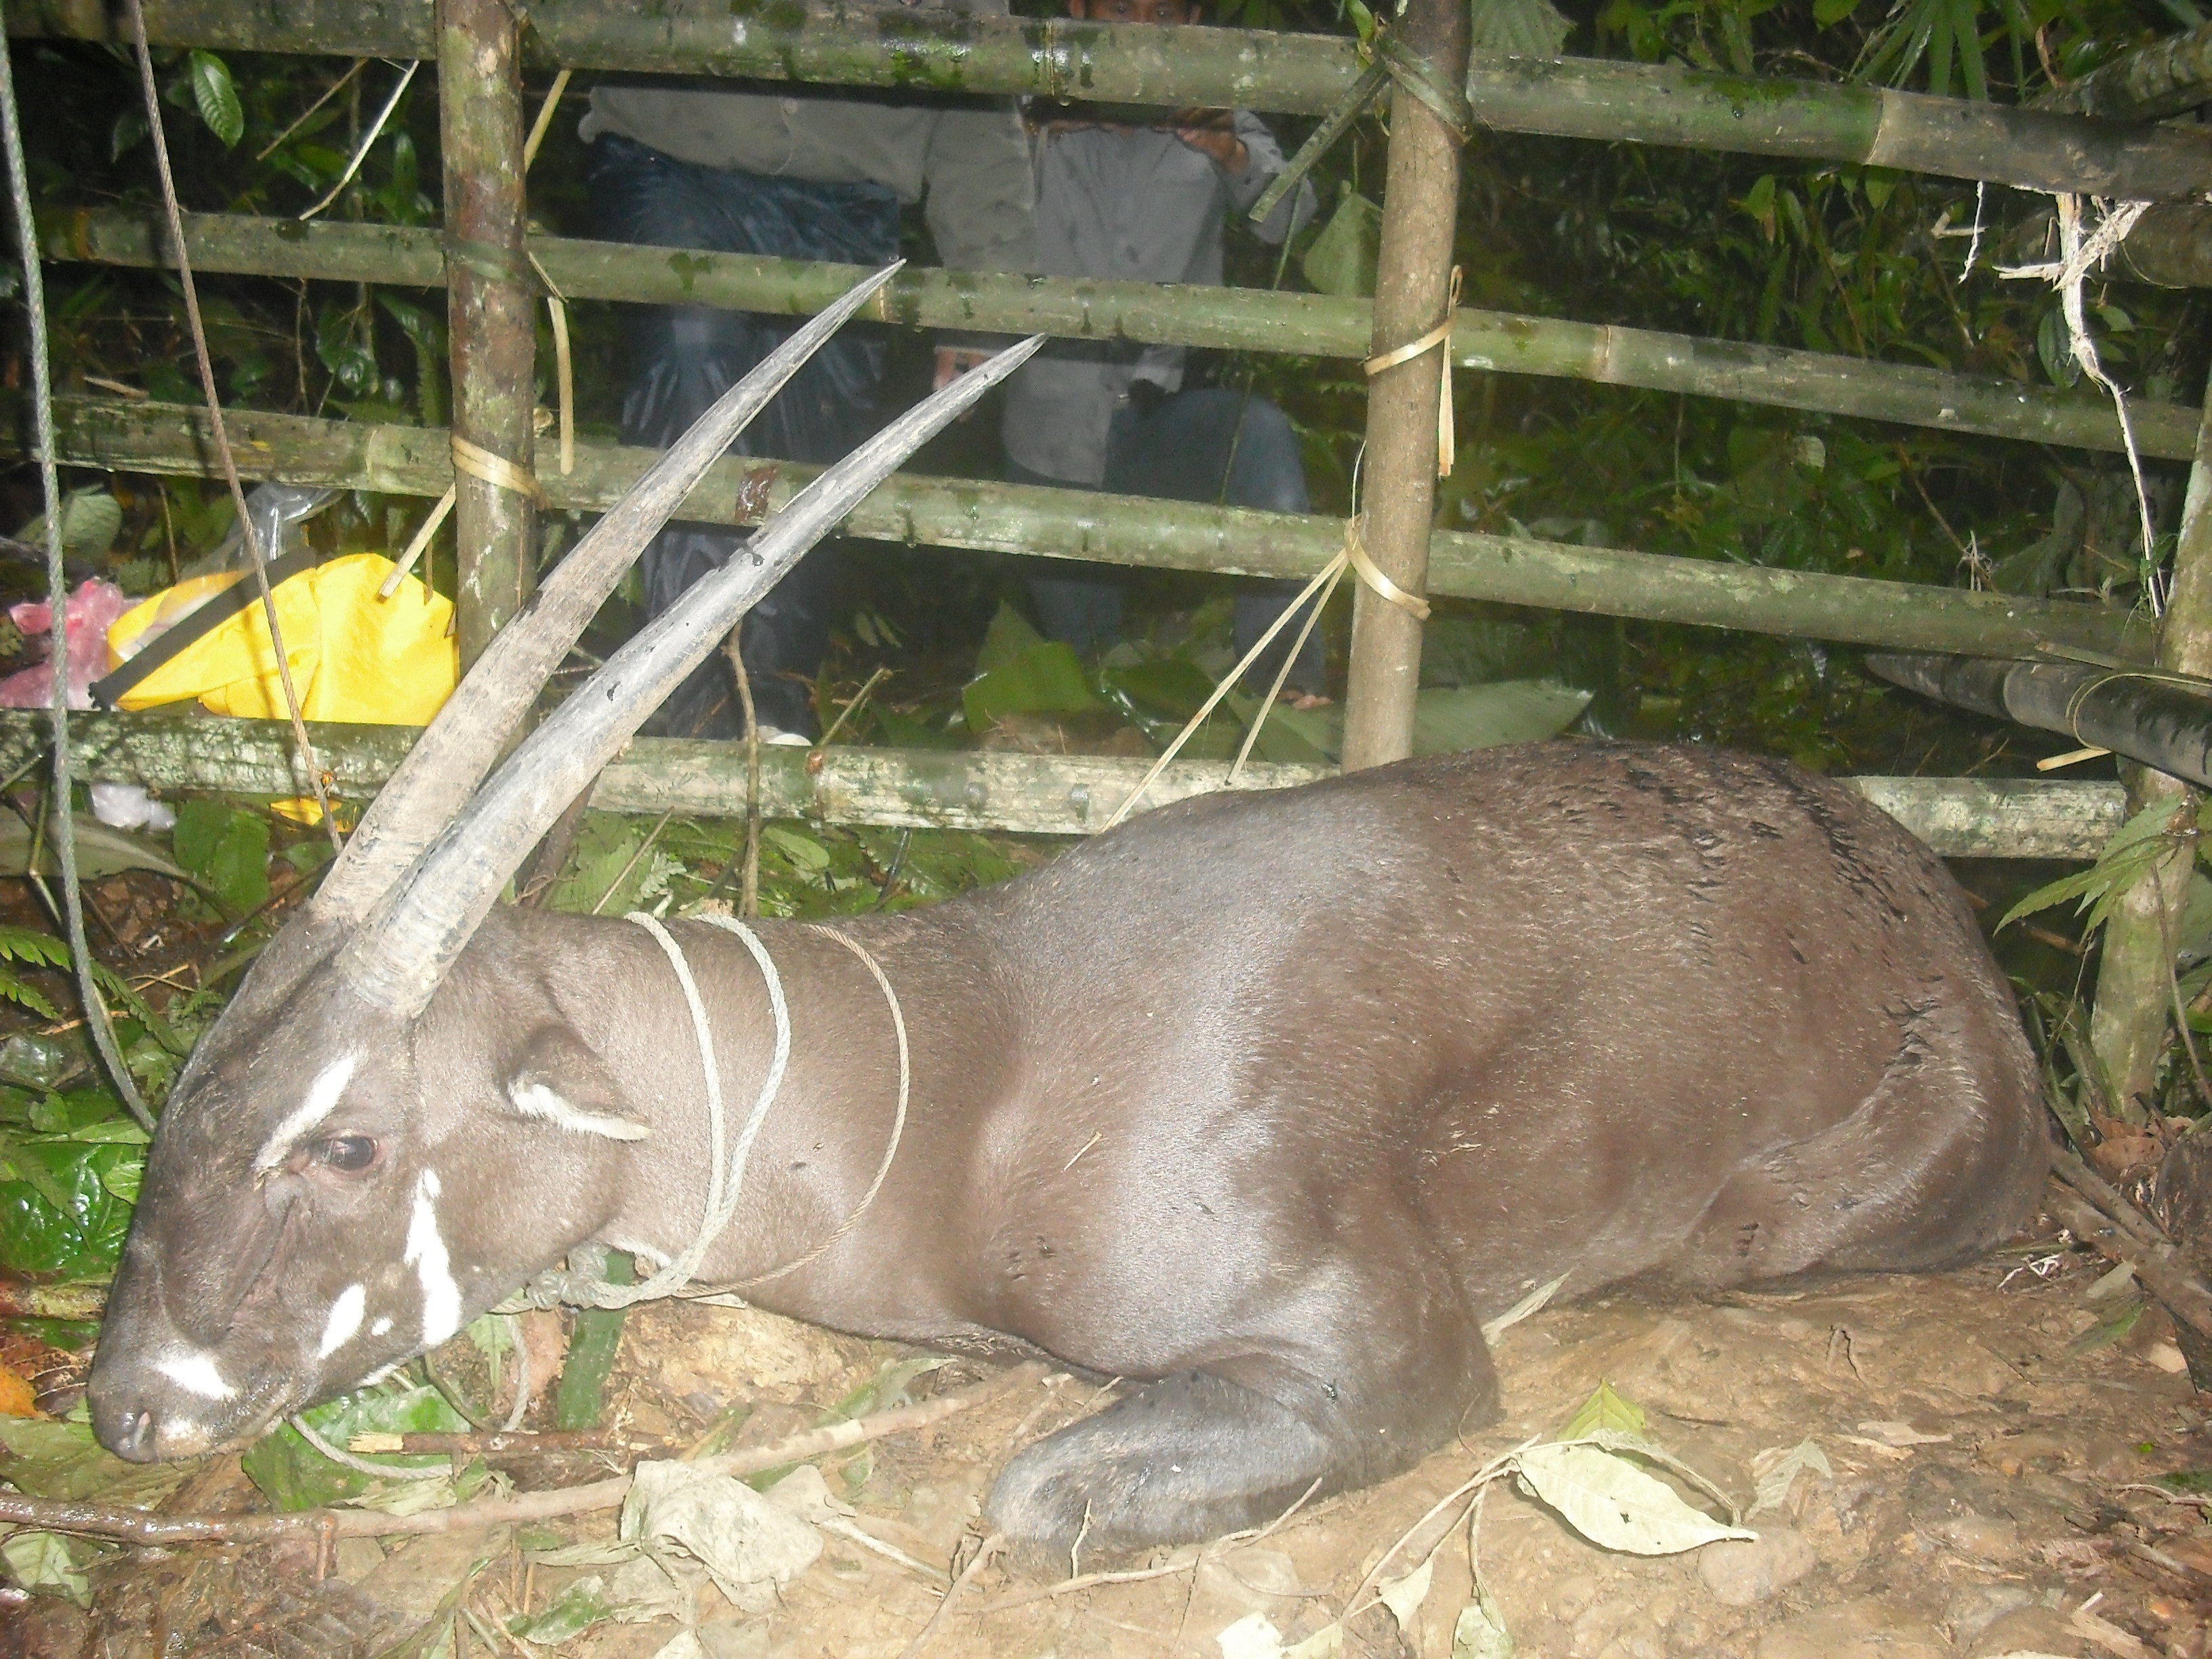 Saola captured by villagers in Laos